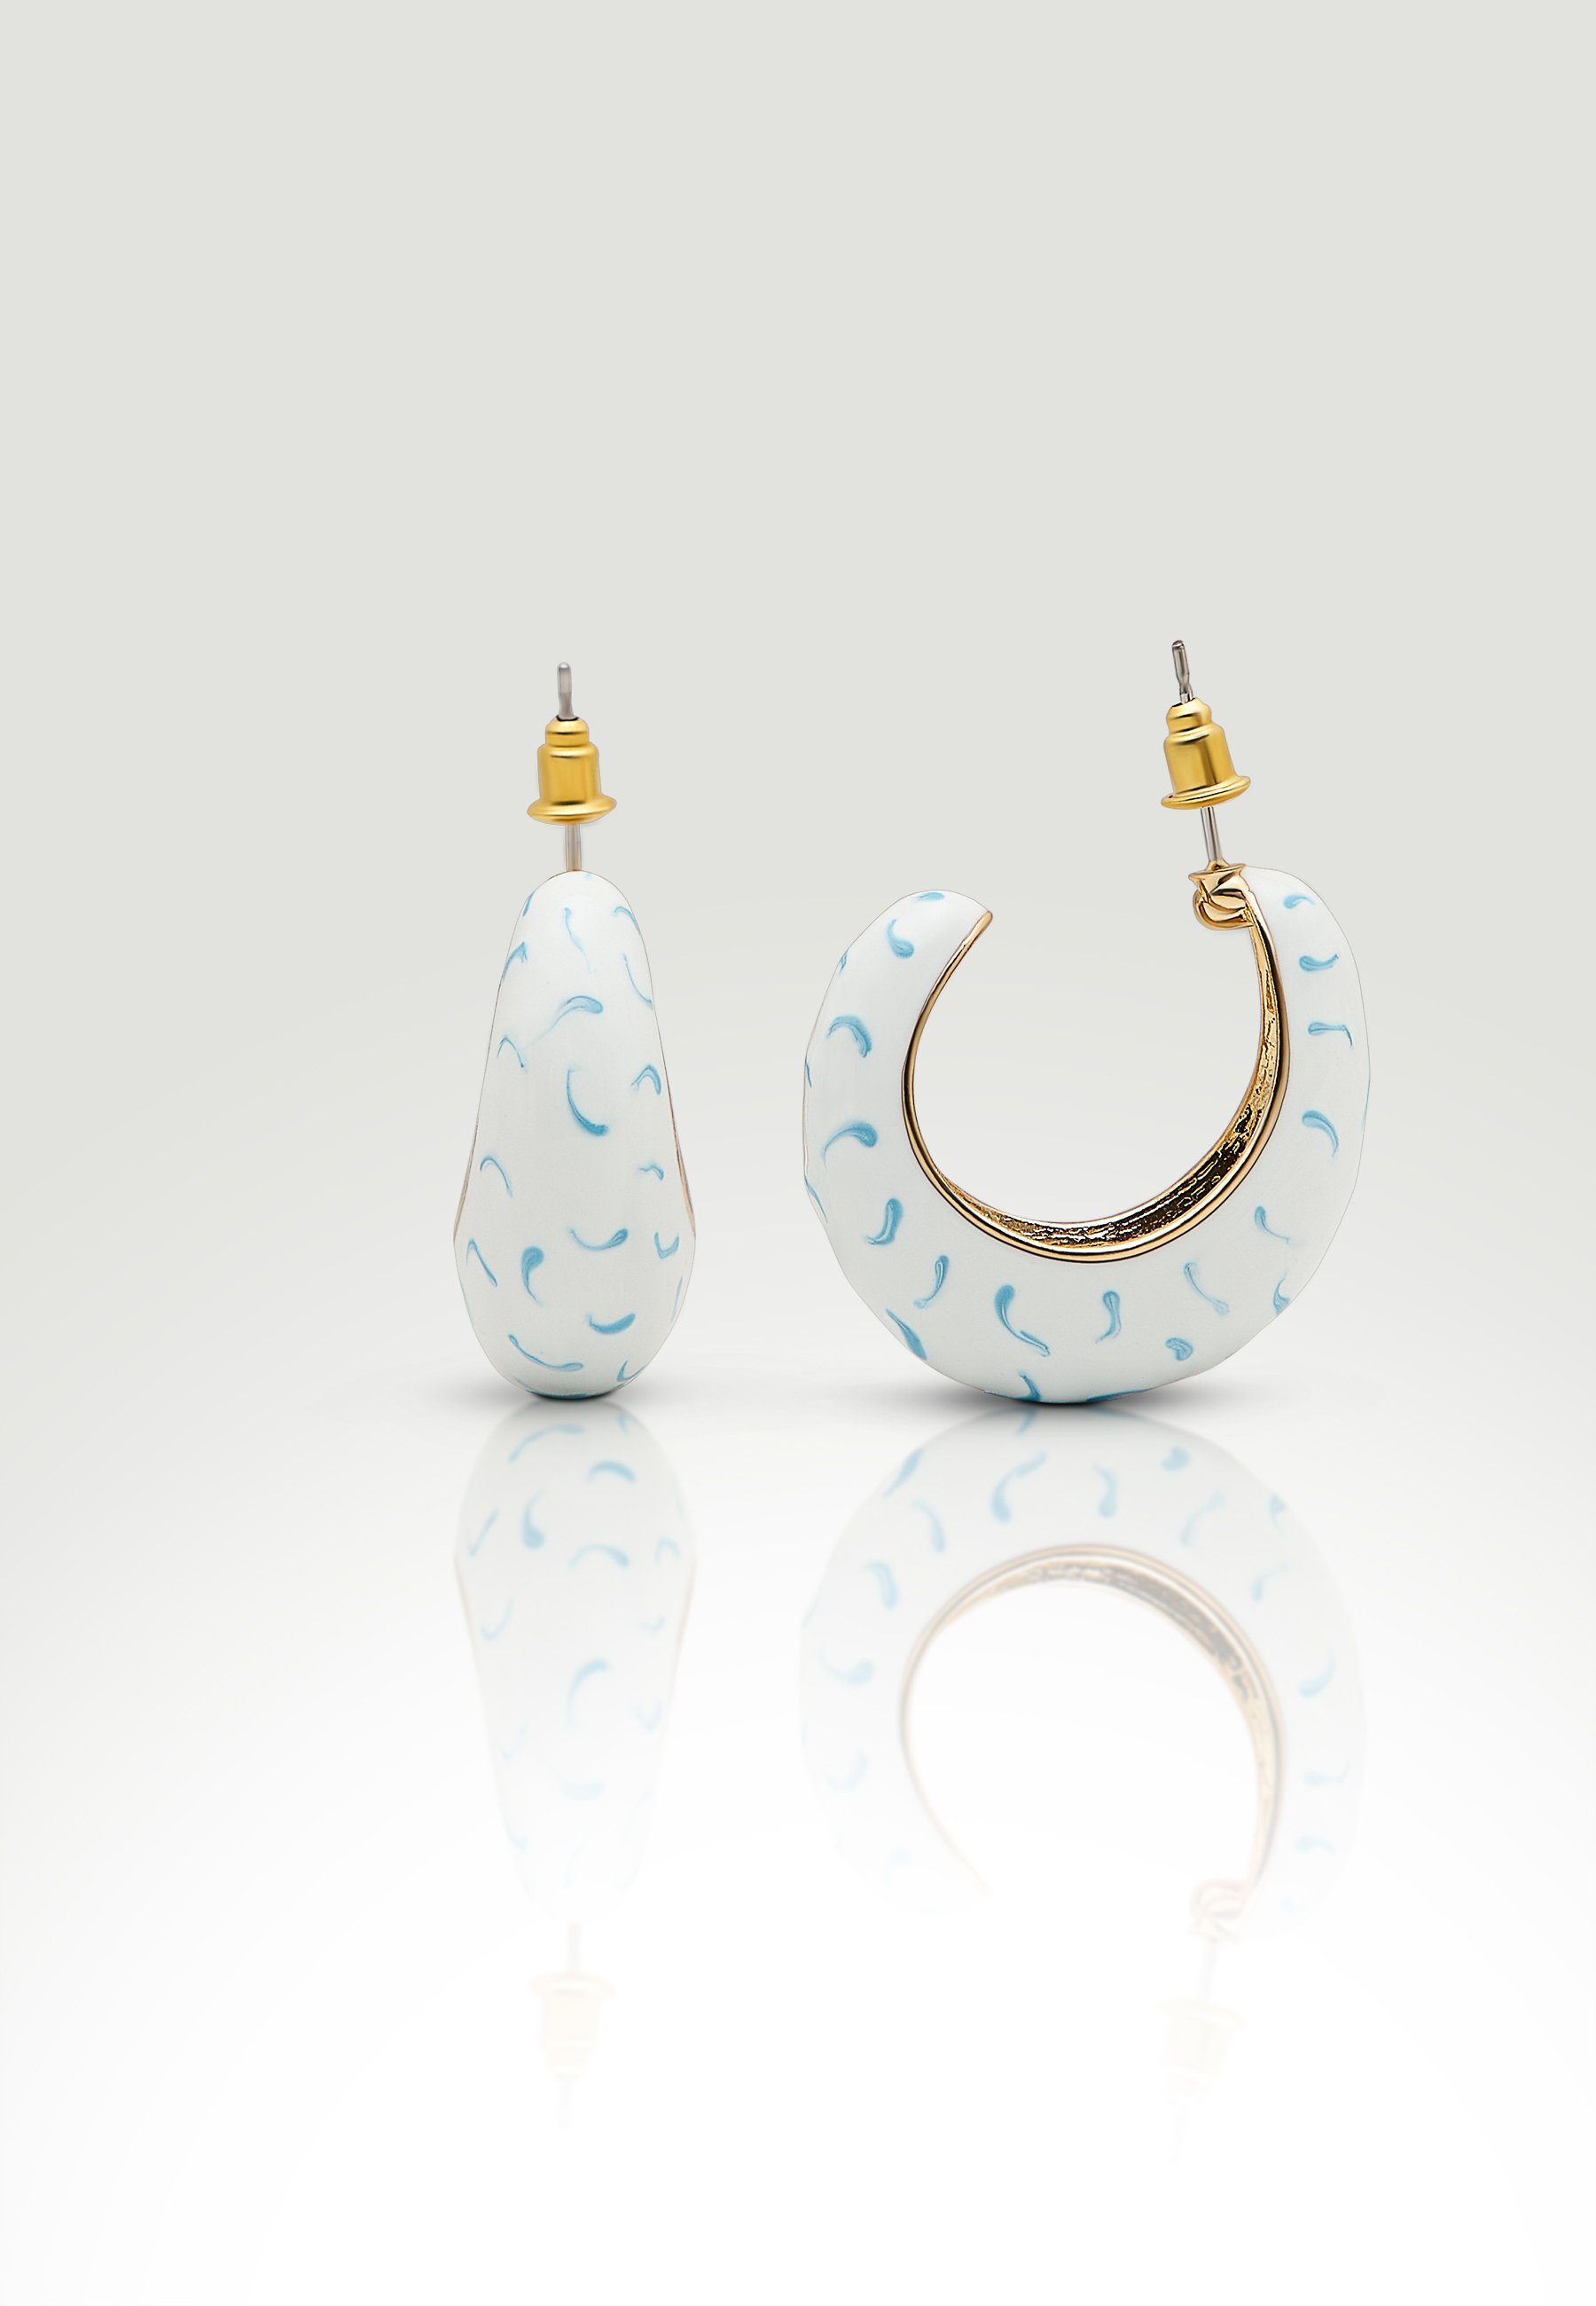 Tokyo Jane Ohrring-Set Mia, Gold Plated und Marble Muster White Dots